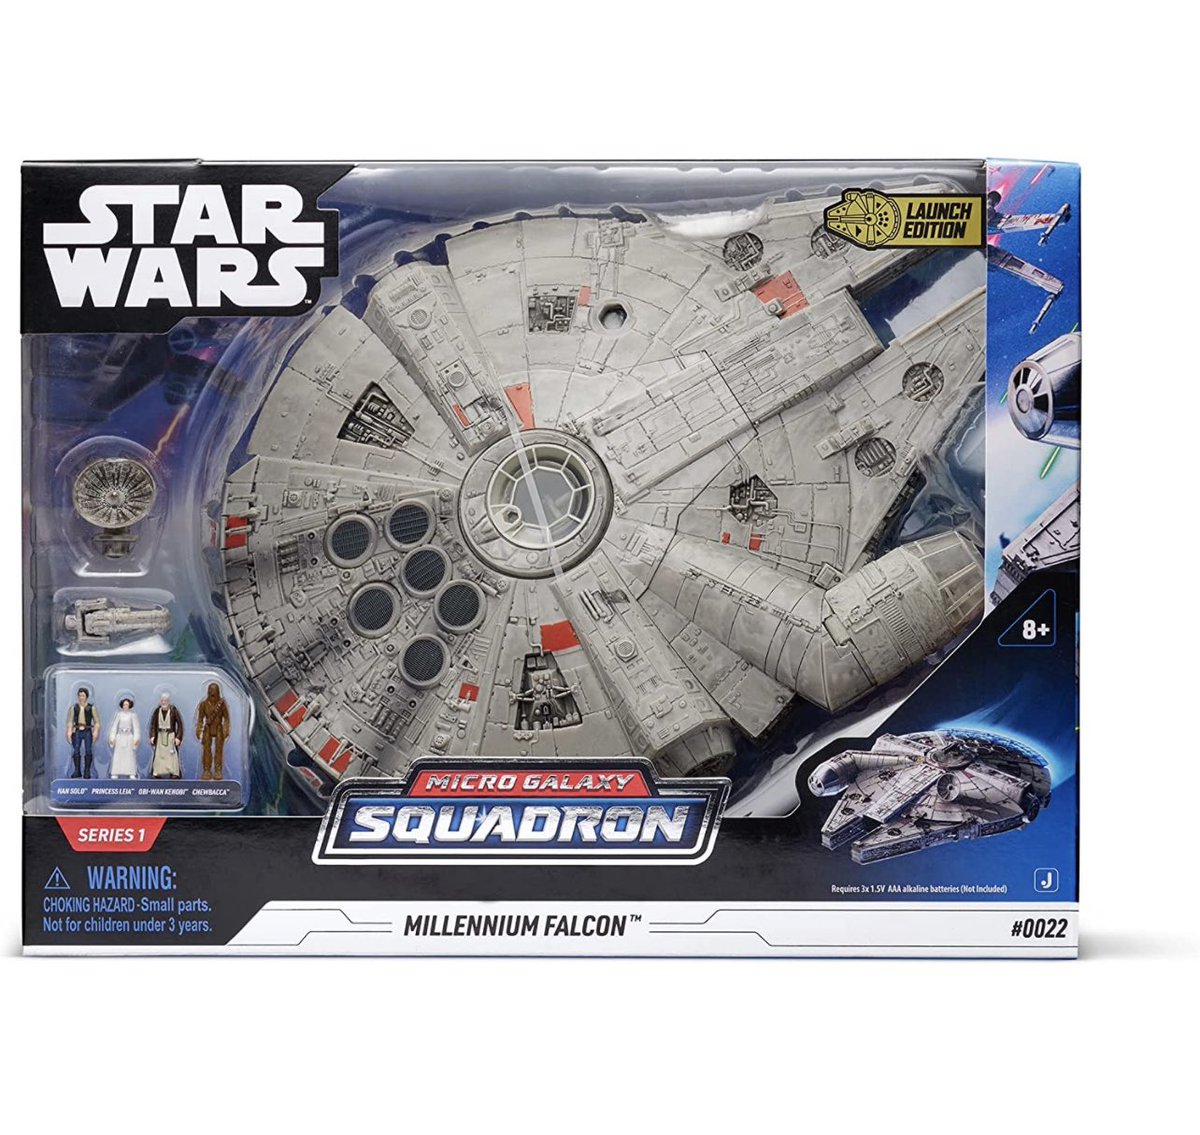 Star Wars Micro Galaxy Squadron Millennium Falcon is down to $21.34 at Amazon! amzn.to/3YItbdn

#ad #microgalaxysquadron #jazwares #jazwarestoys #milleniumfalcon #starwars #starwarstoys #amazonfinds #actionfigures #toys